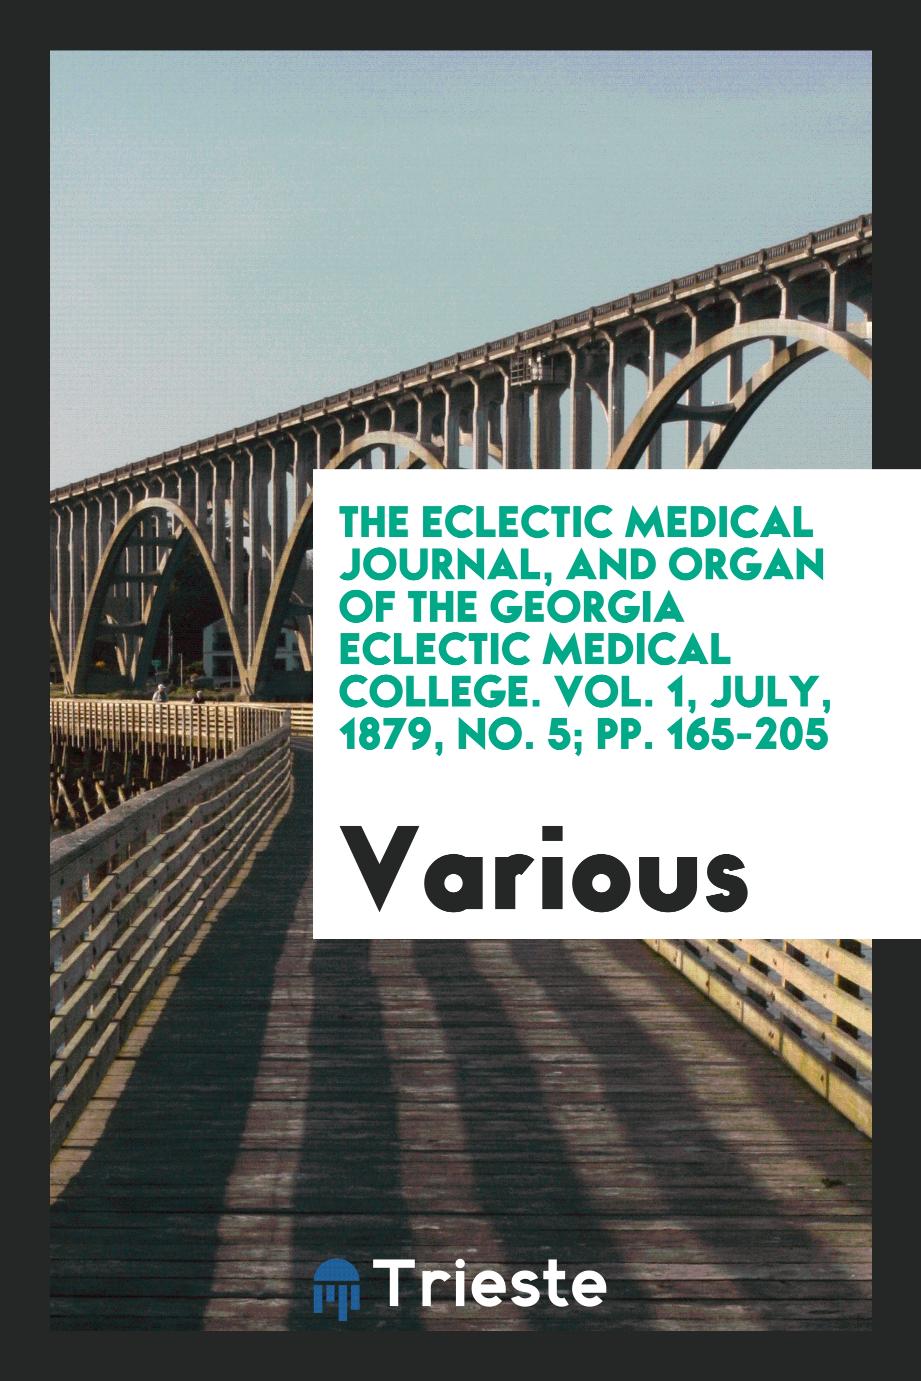 The Eclectic Medical Journal, and organ of the Georgia Eclectic Medical college. Vol. 1, July, 1879, No. 5; pp. 165-205